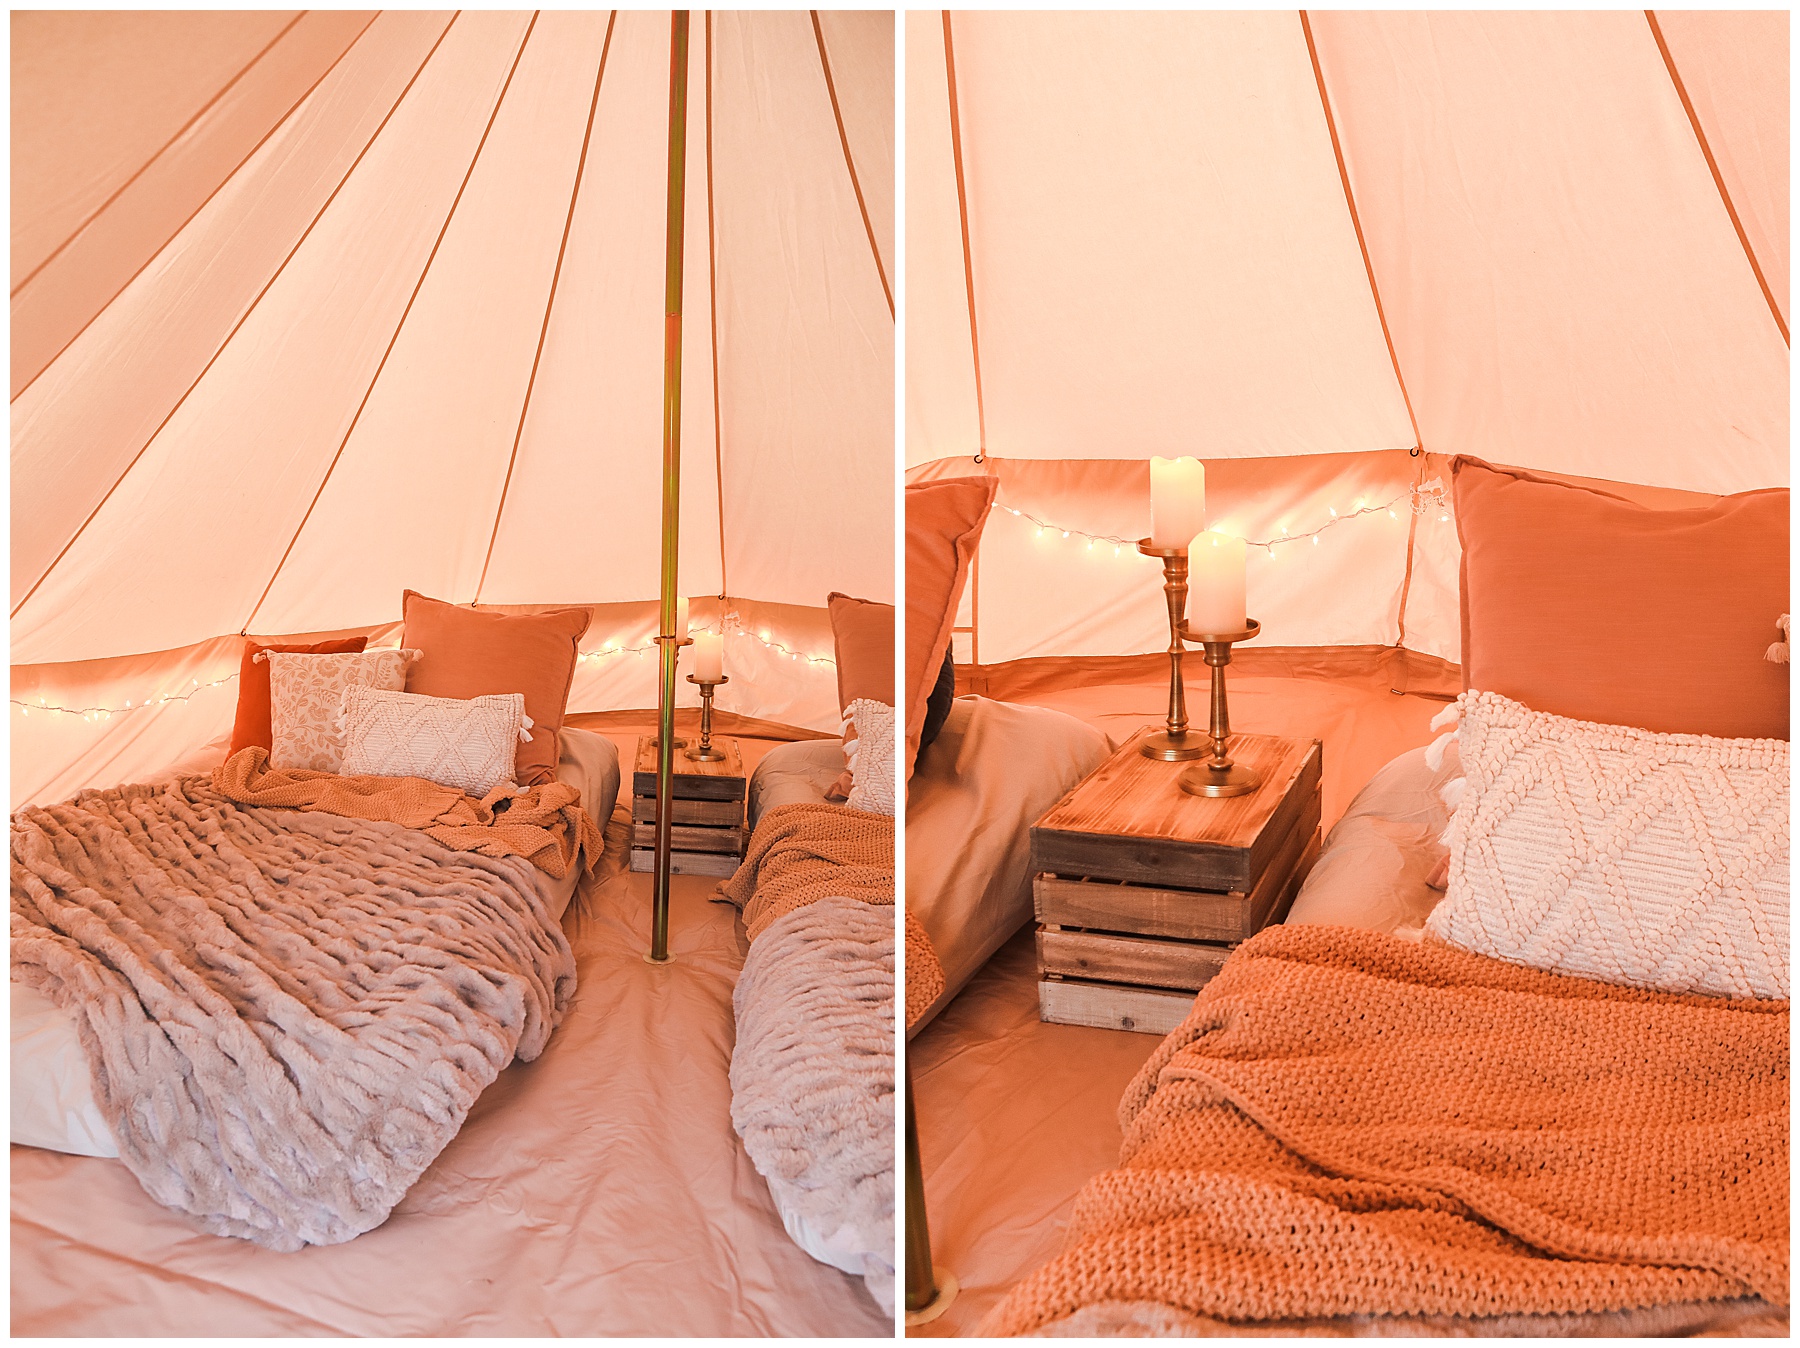 Camping in the backyard - Ideas for glamping